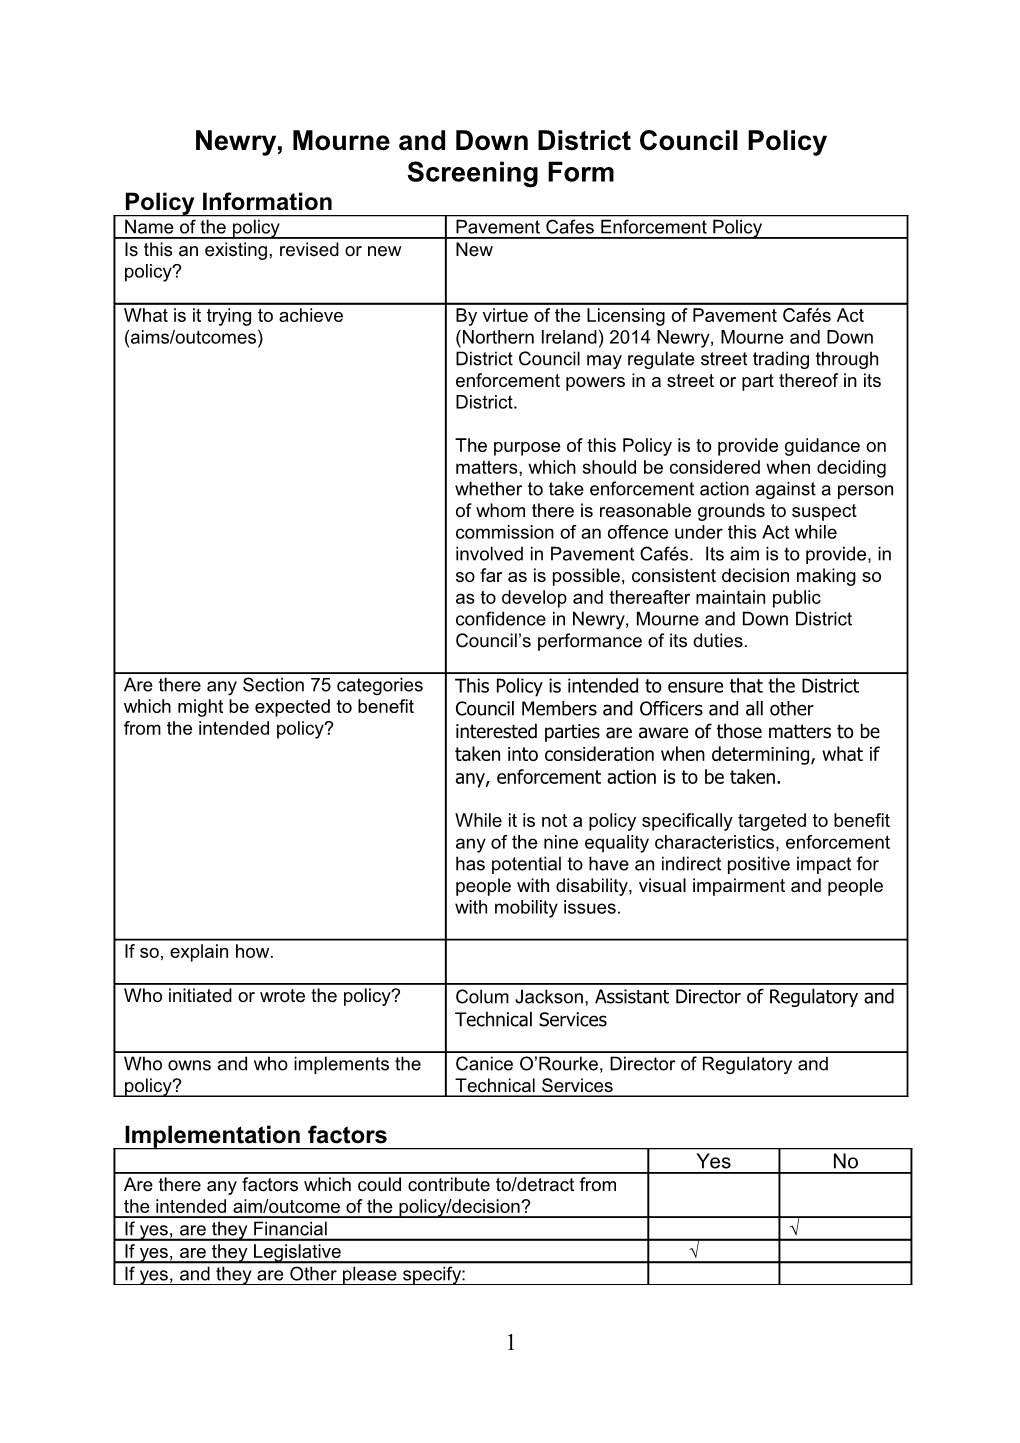 Newry, Mourne and Down District Council Policy Screening Form s3